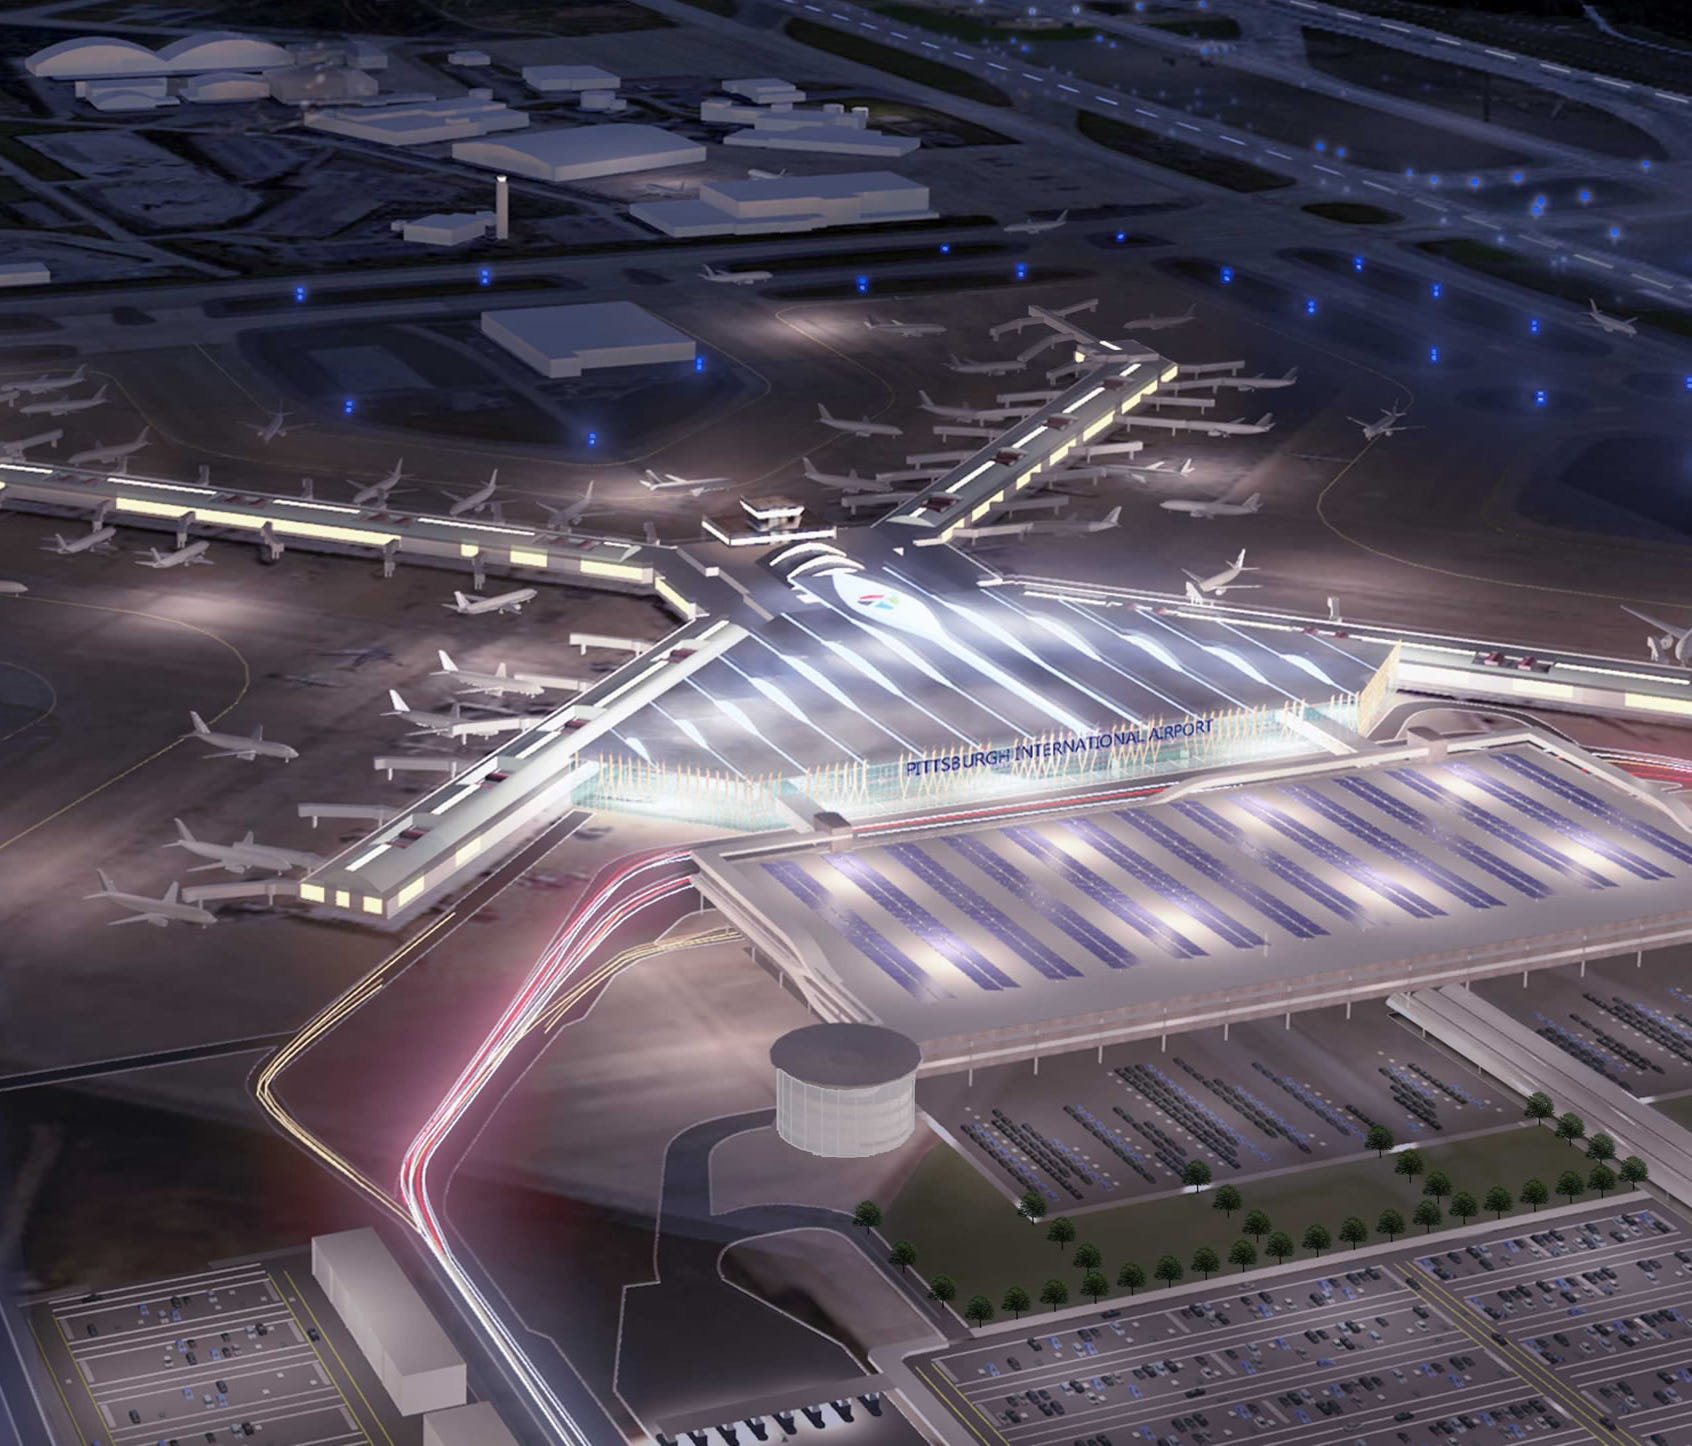 This rendering shows what could be a new $1.1 billion landside terminal at Pittsburgh International Airport. The renderings show 